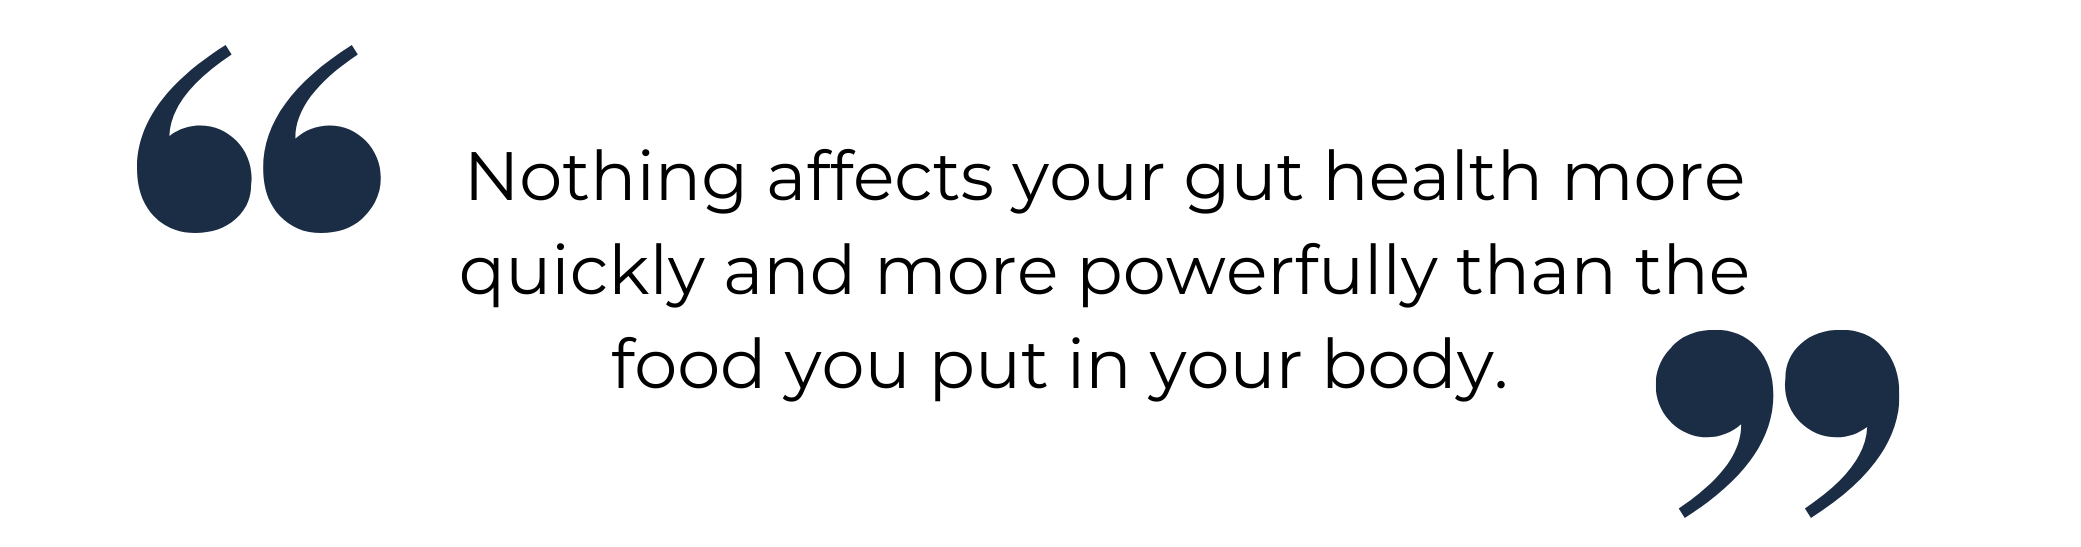 Nothing affects your gut health more quickly and more powerfully than the food you put in your body.